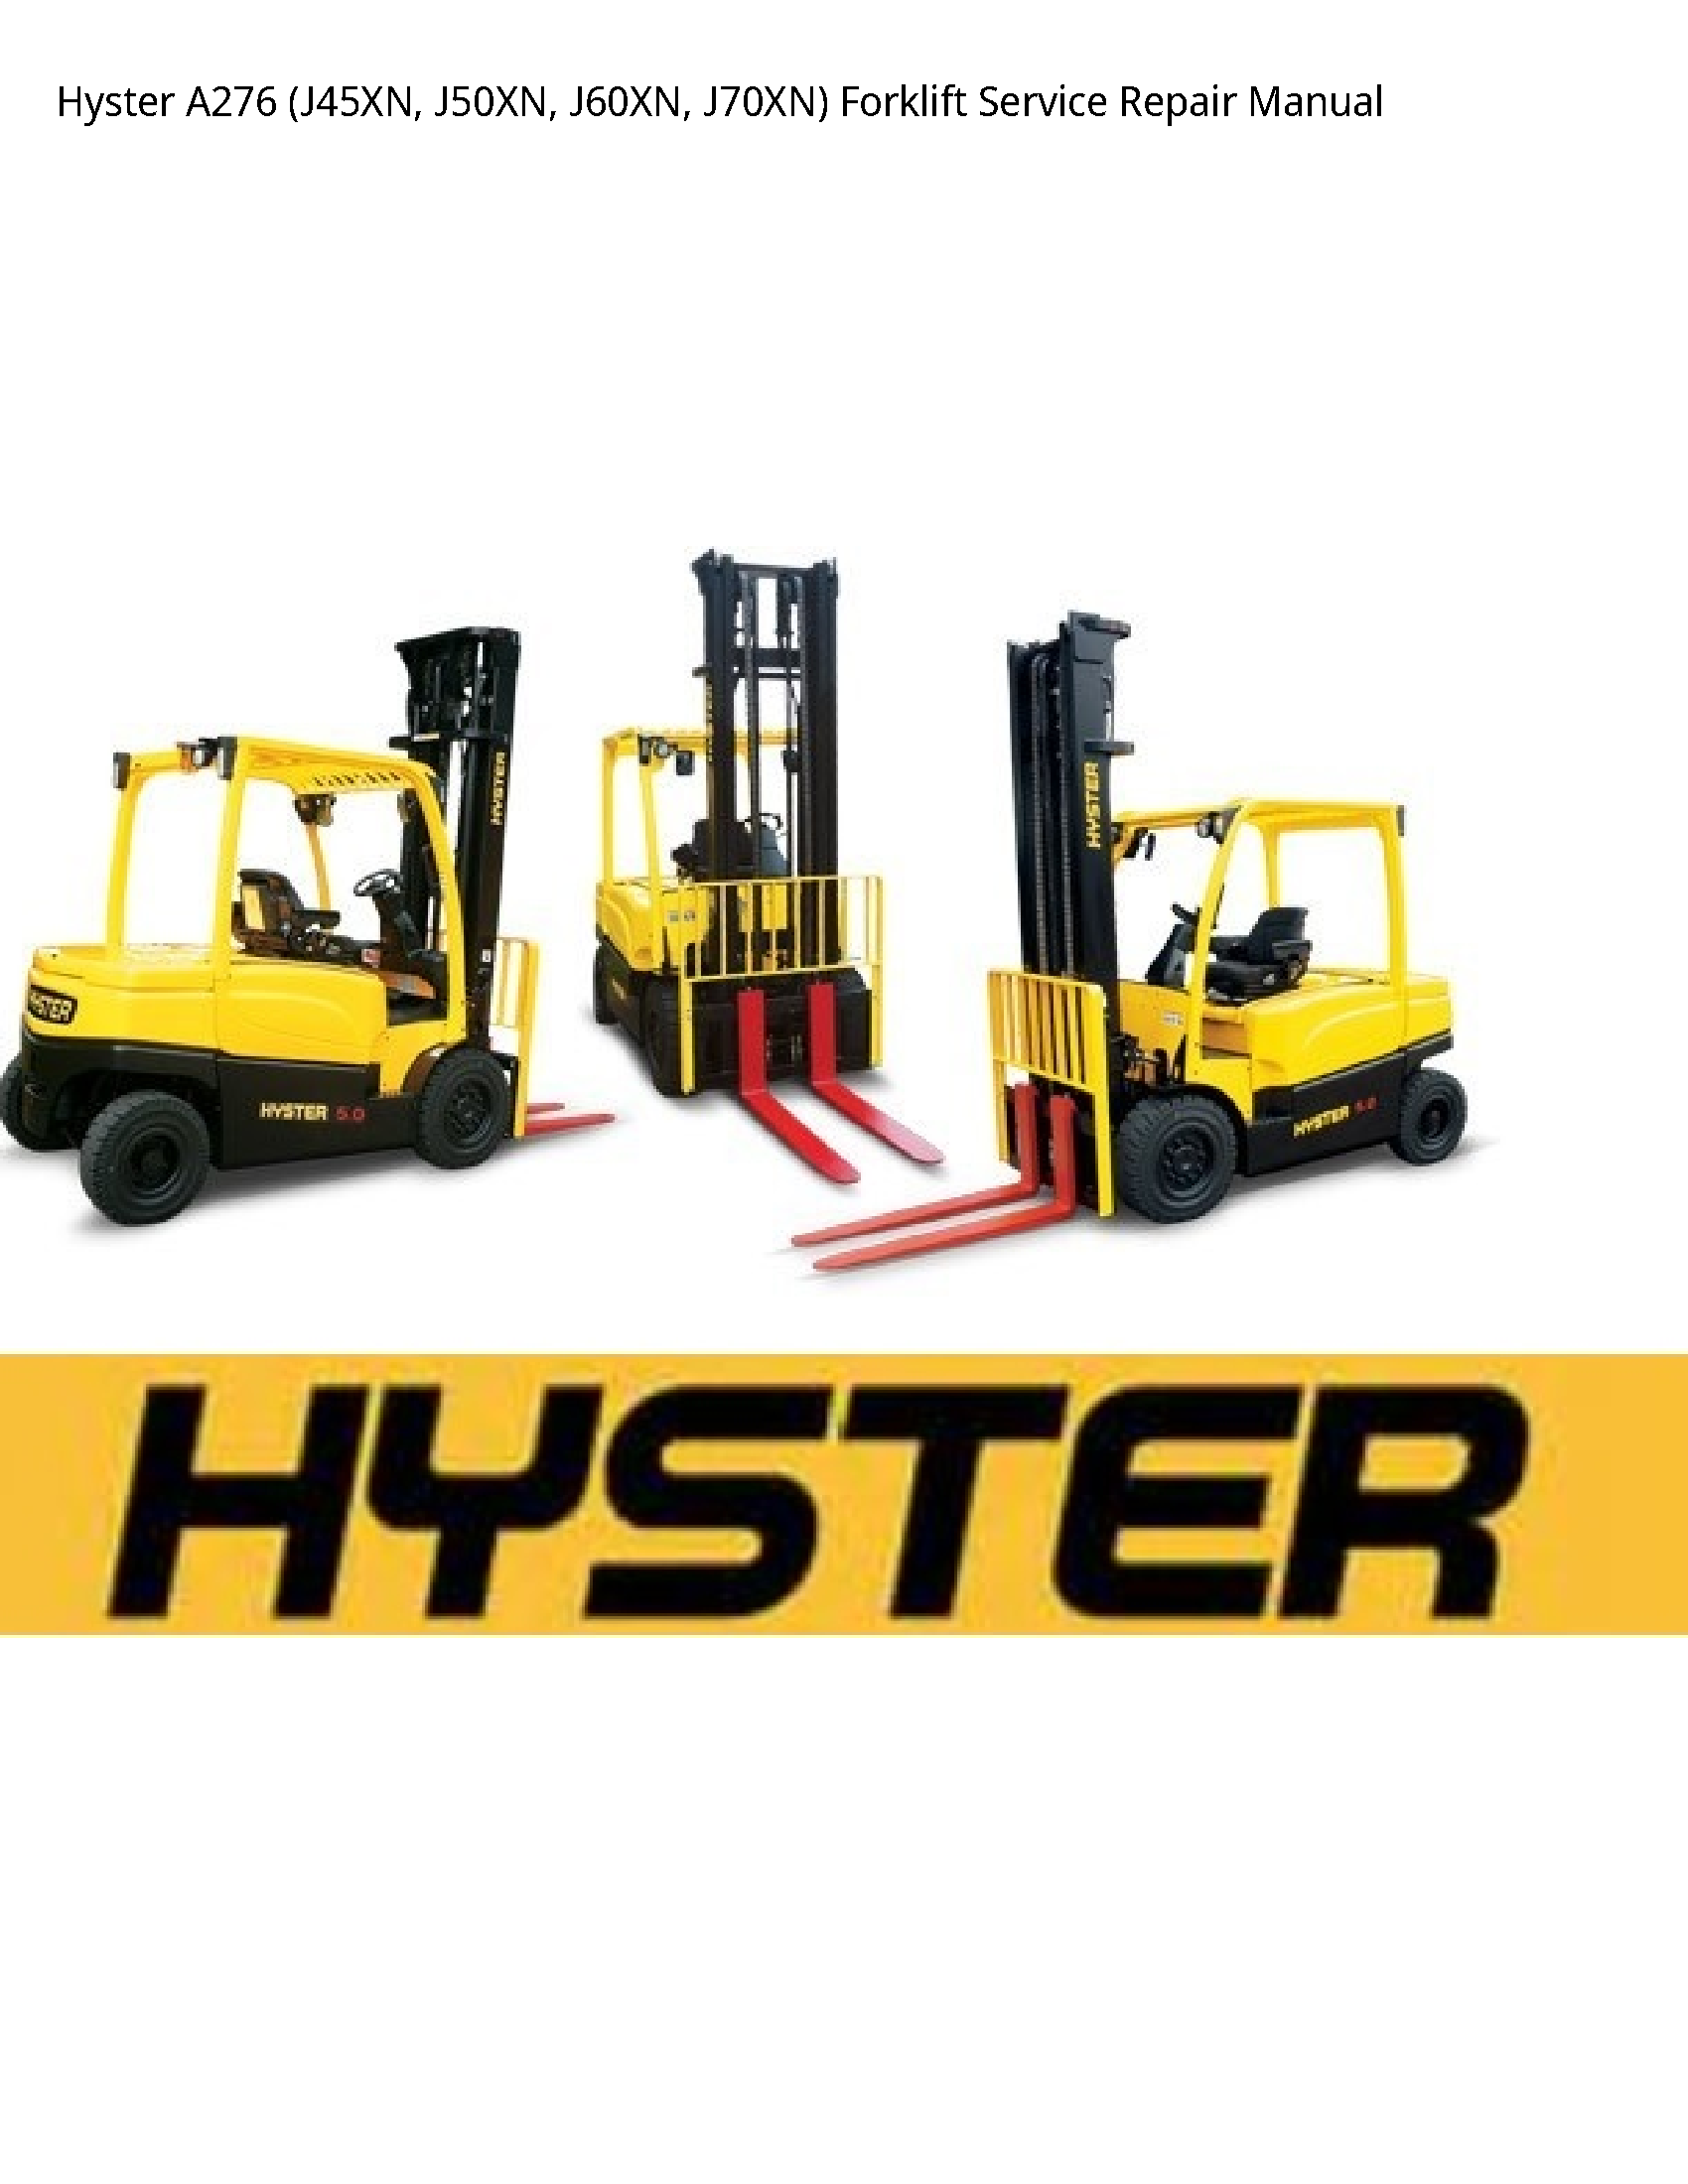 Hyster A276 Forklift manual